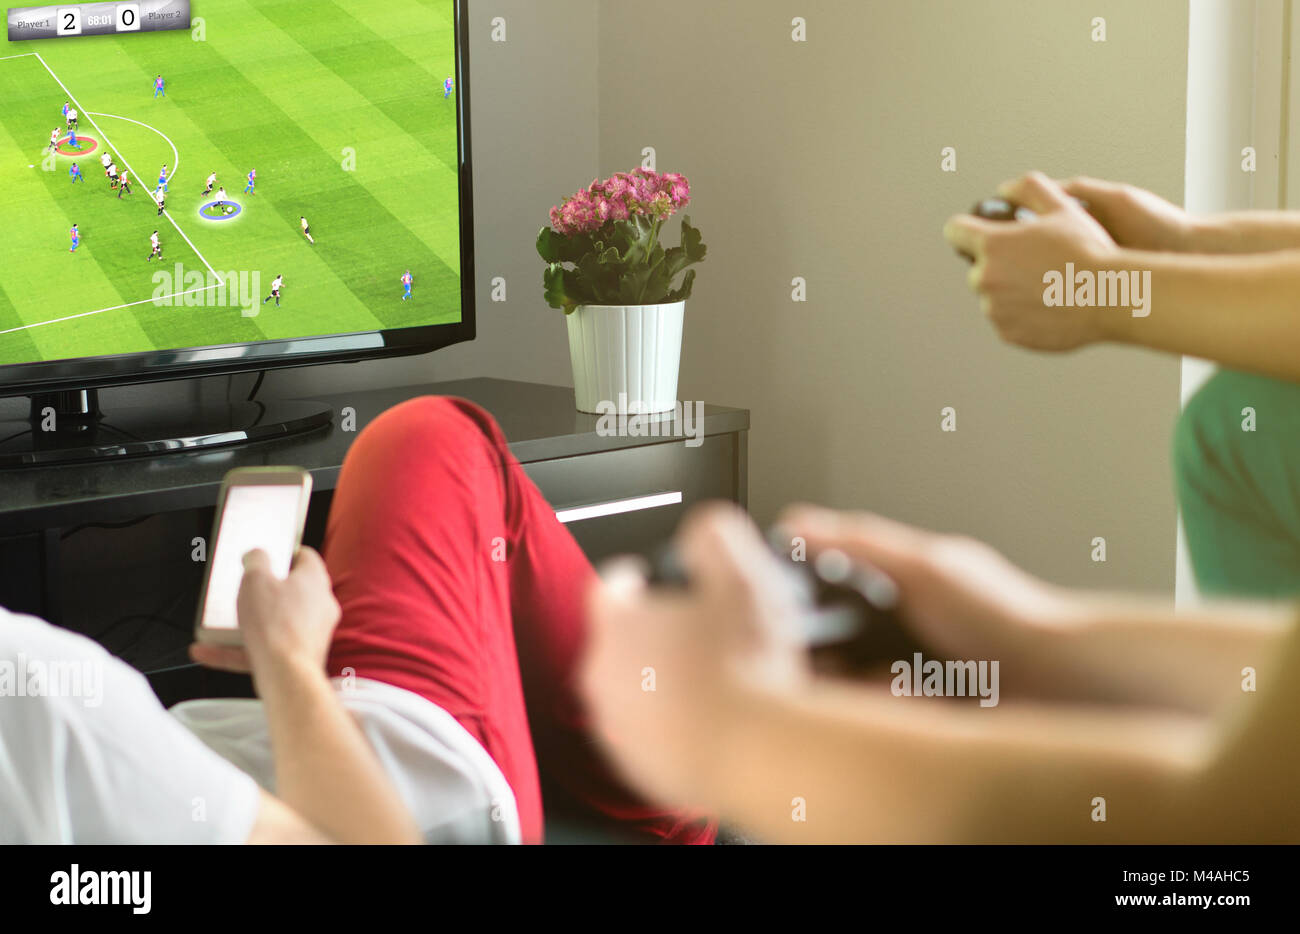 Group of friends hanging out and playing imaginary soccer or football video game with console and tv. Guys night, party and weekend concept. Stock Photo